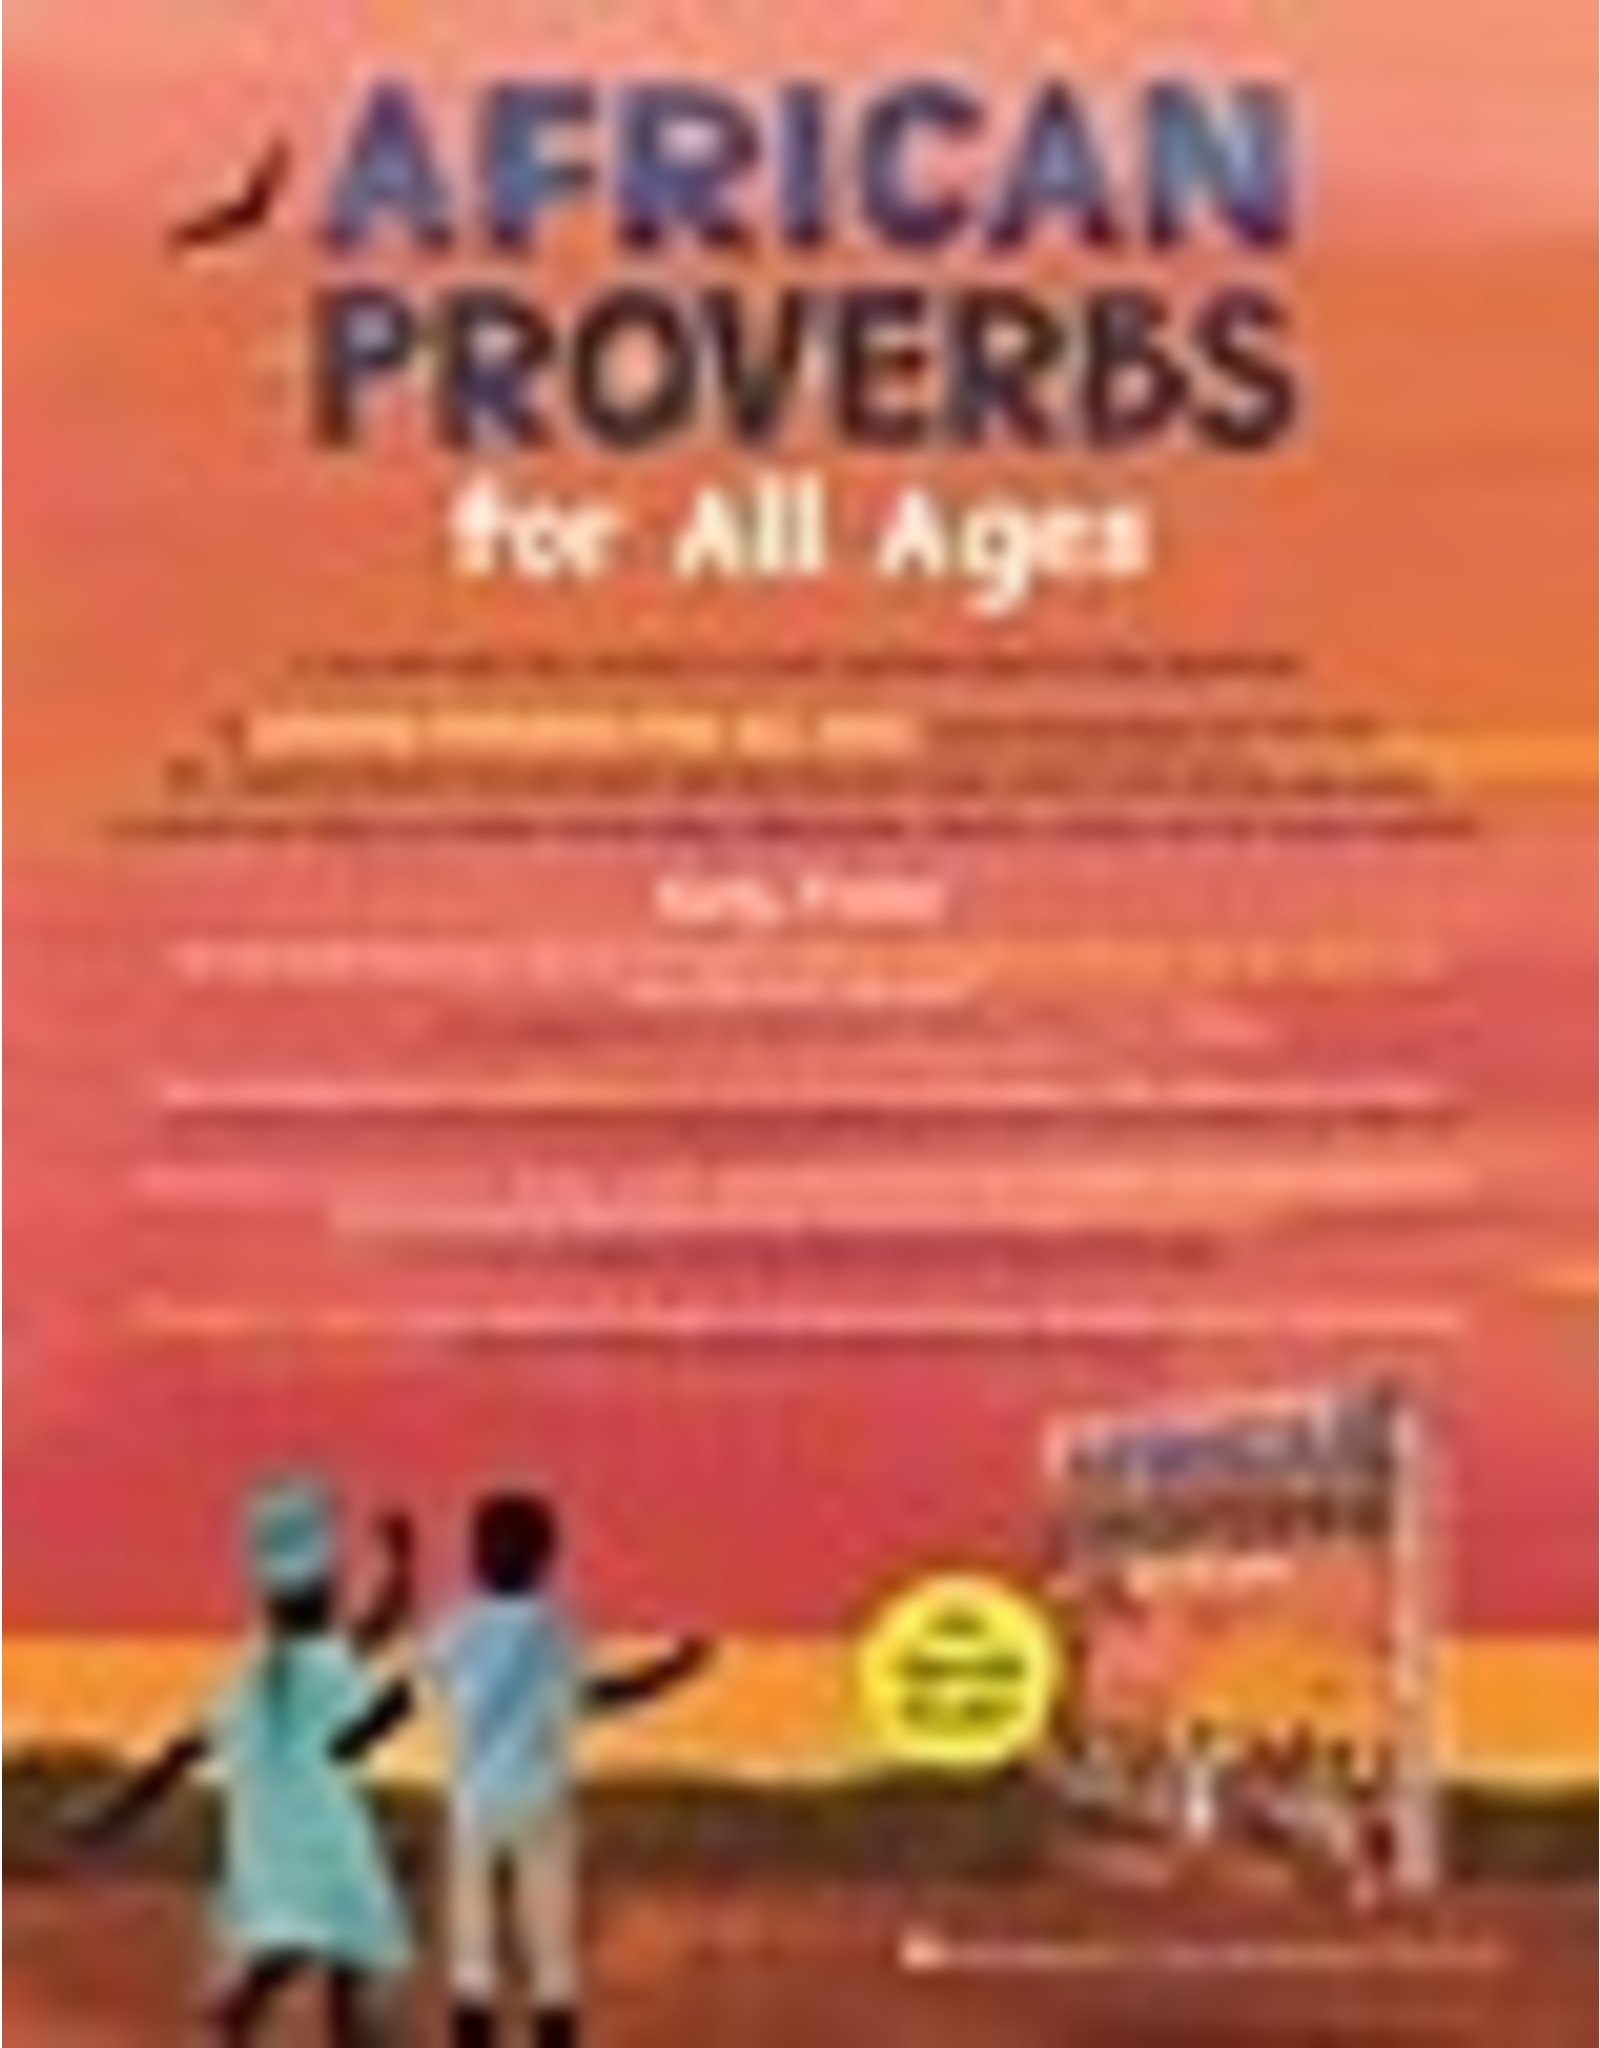 Books African Proverbs : For All Ages collected by Johnetta Betsch Cole and Nelda LaTeef